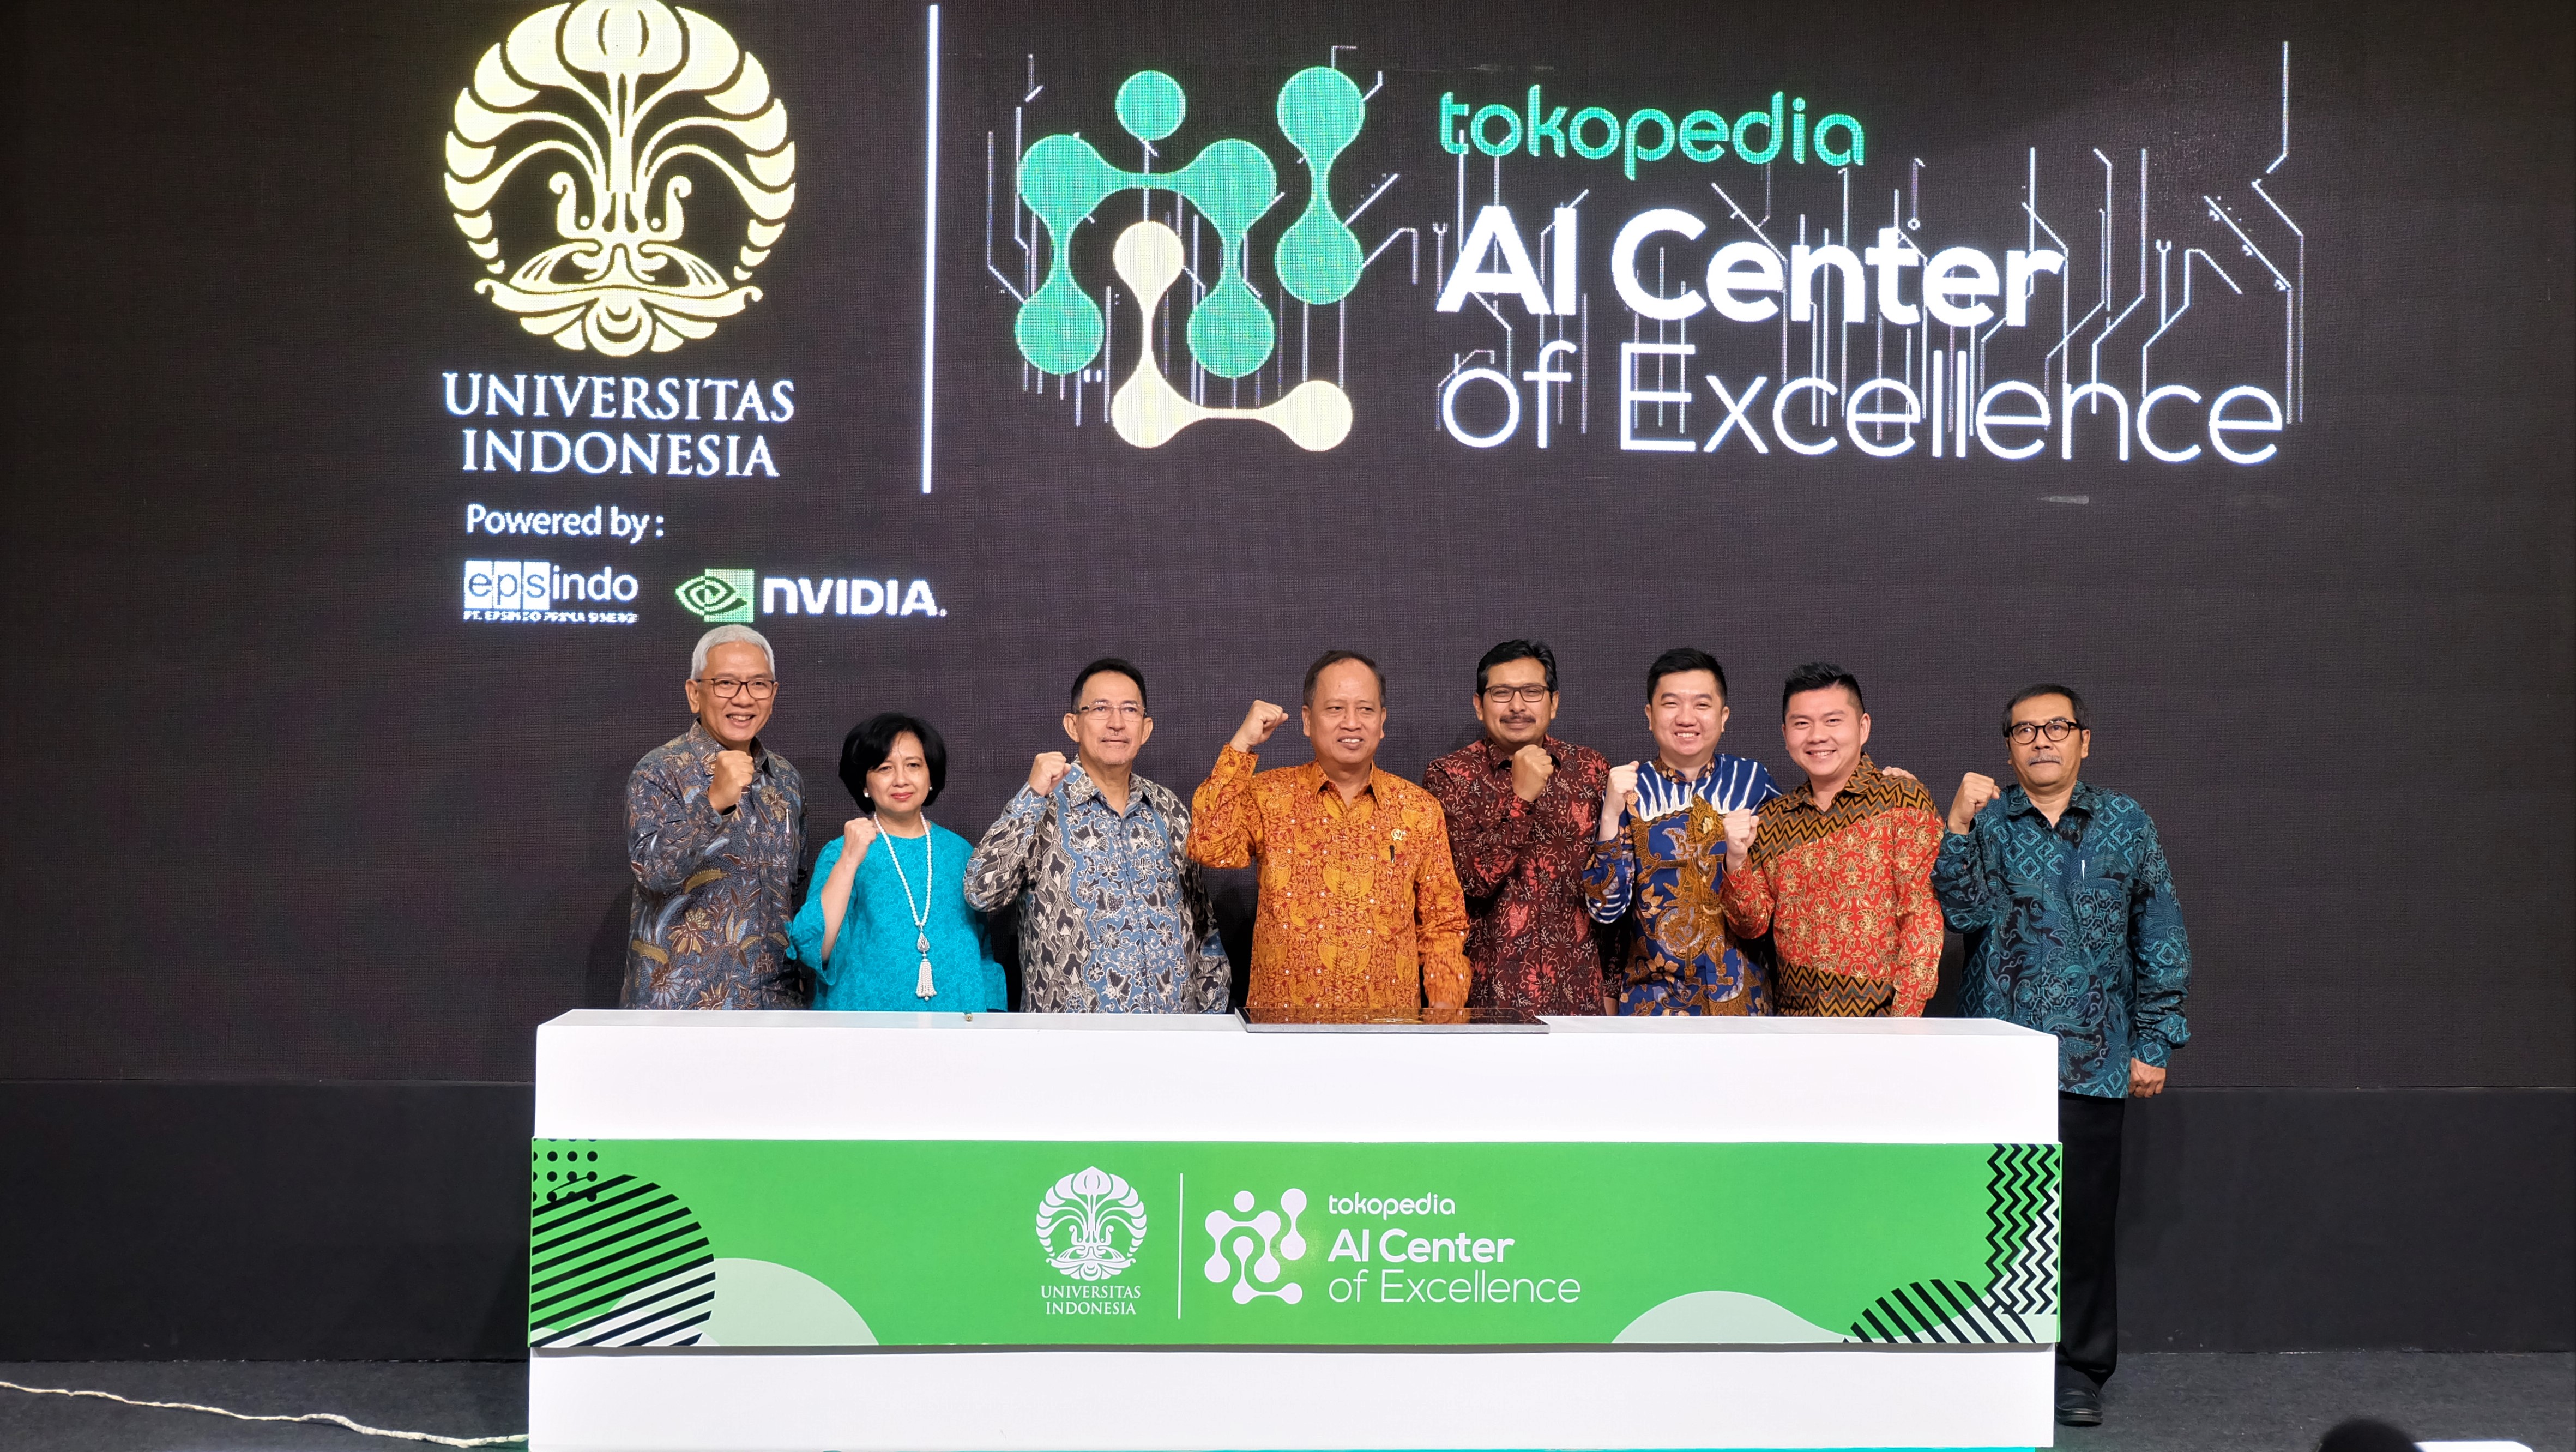 Tokopedia teams up with Universitas Indonesia to launch AI research center